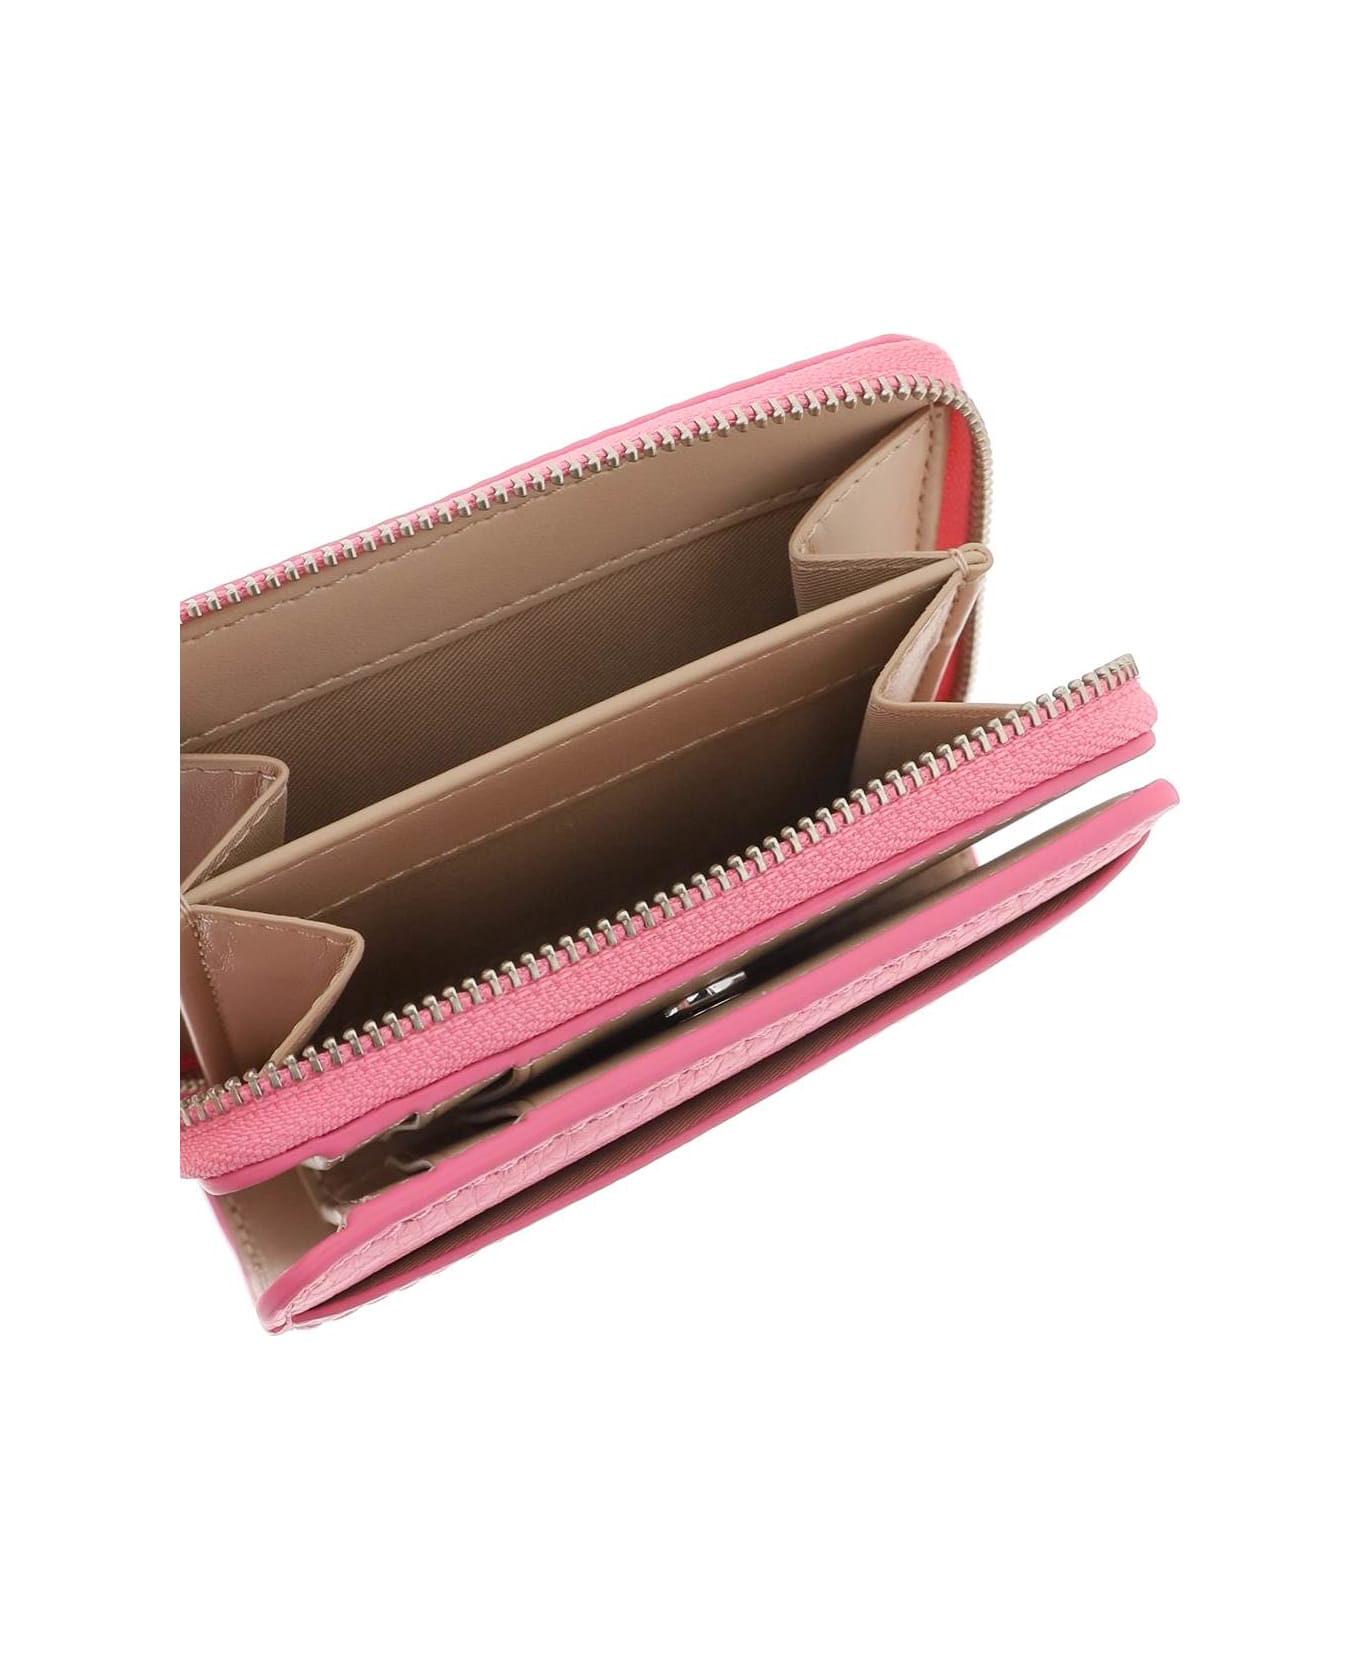 Marc Jacobs The Leather Mini Compact Wallet - PETAL PINK (Pink) 財布